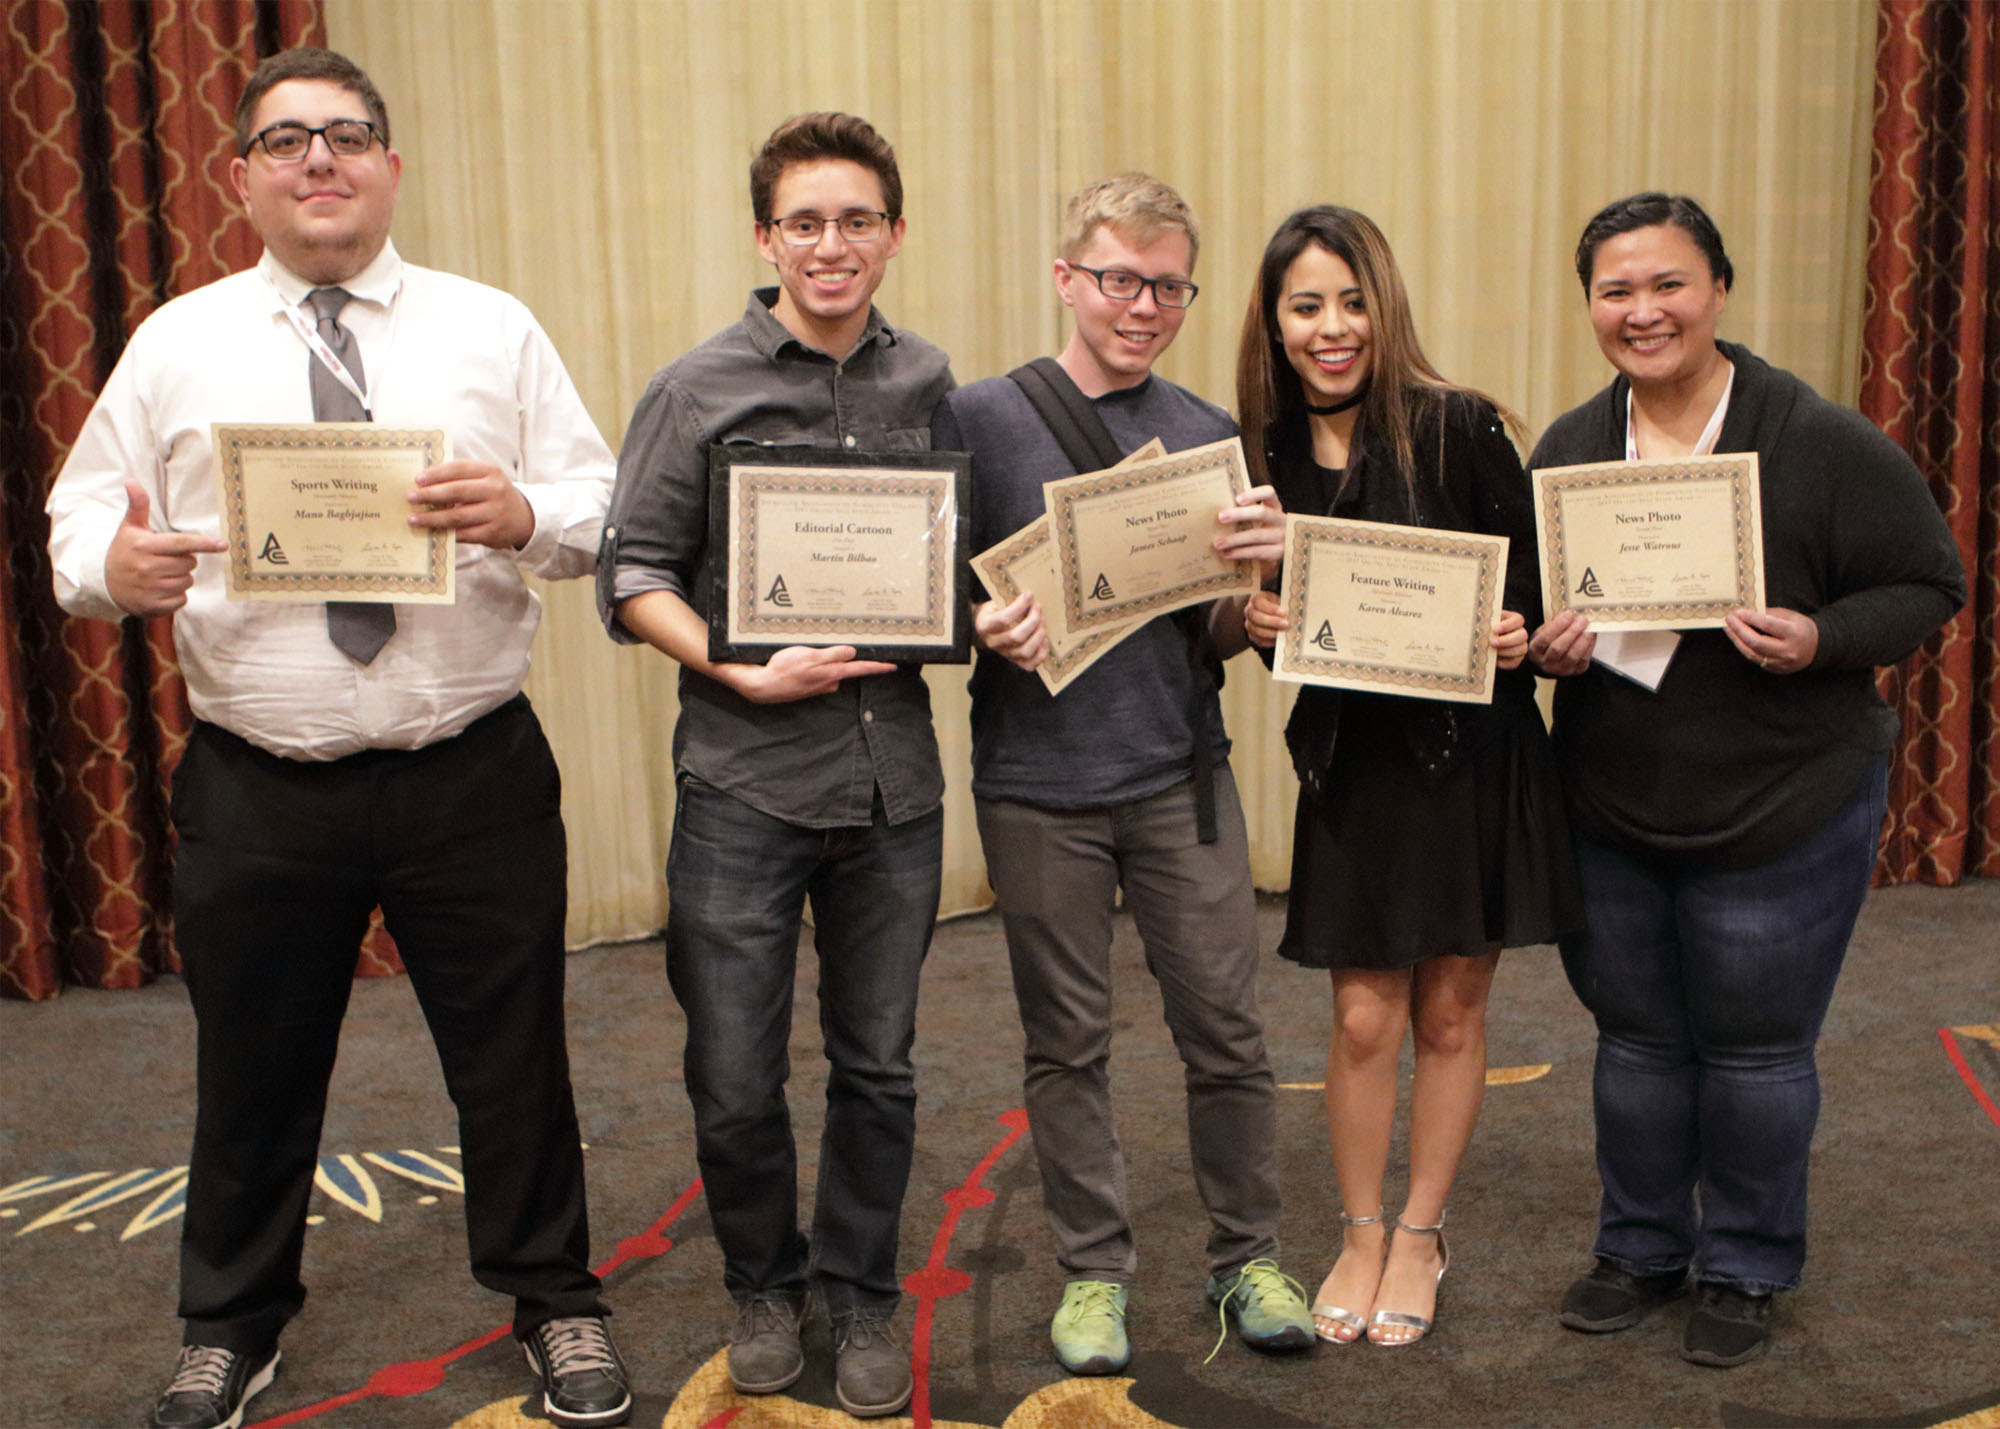 Moorpark+College+receives+11+awards+at+JACC+convention